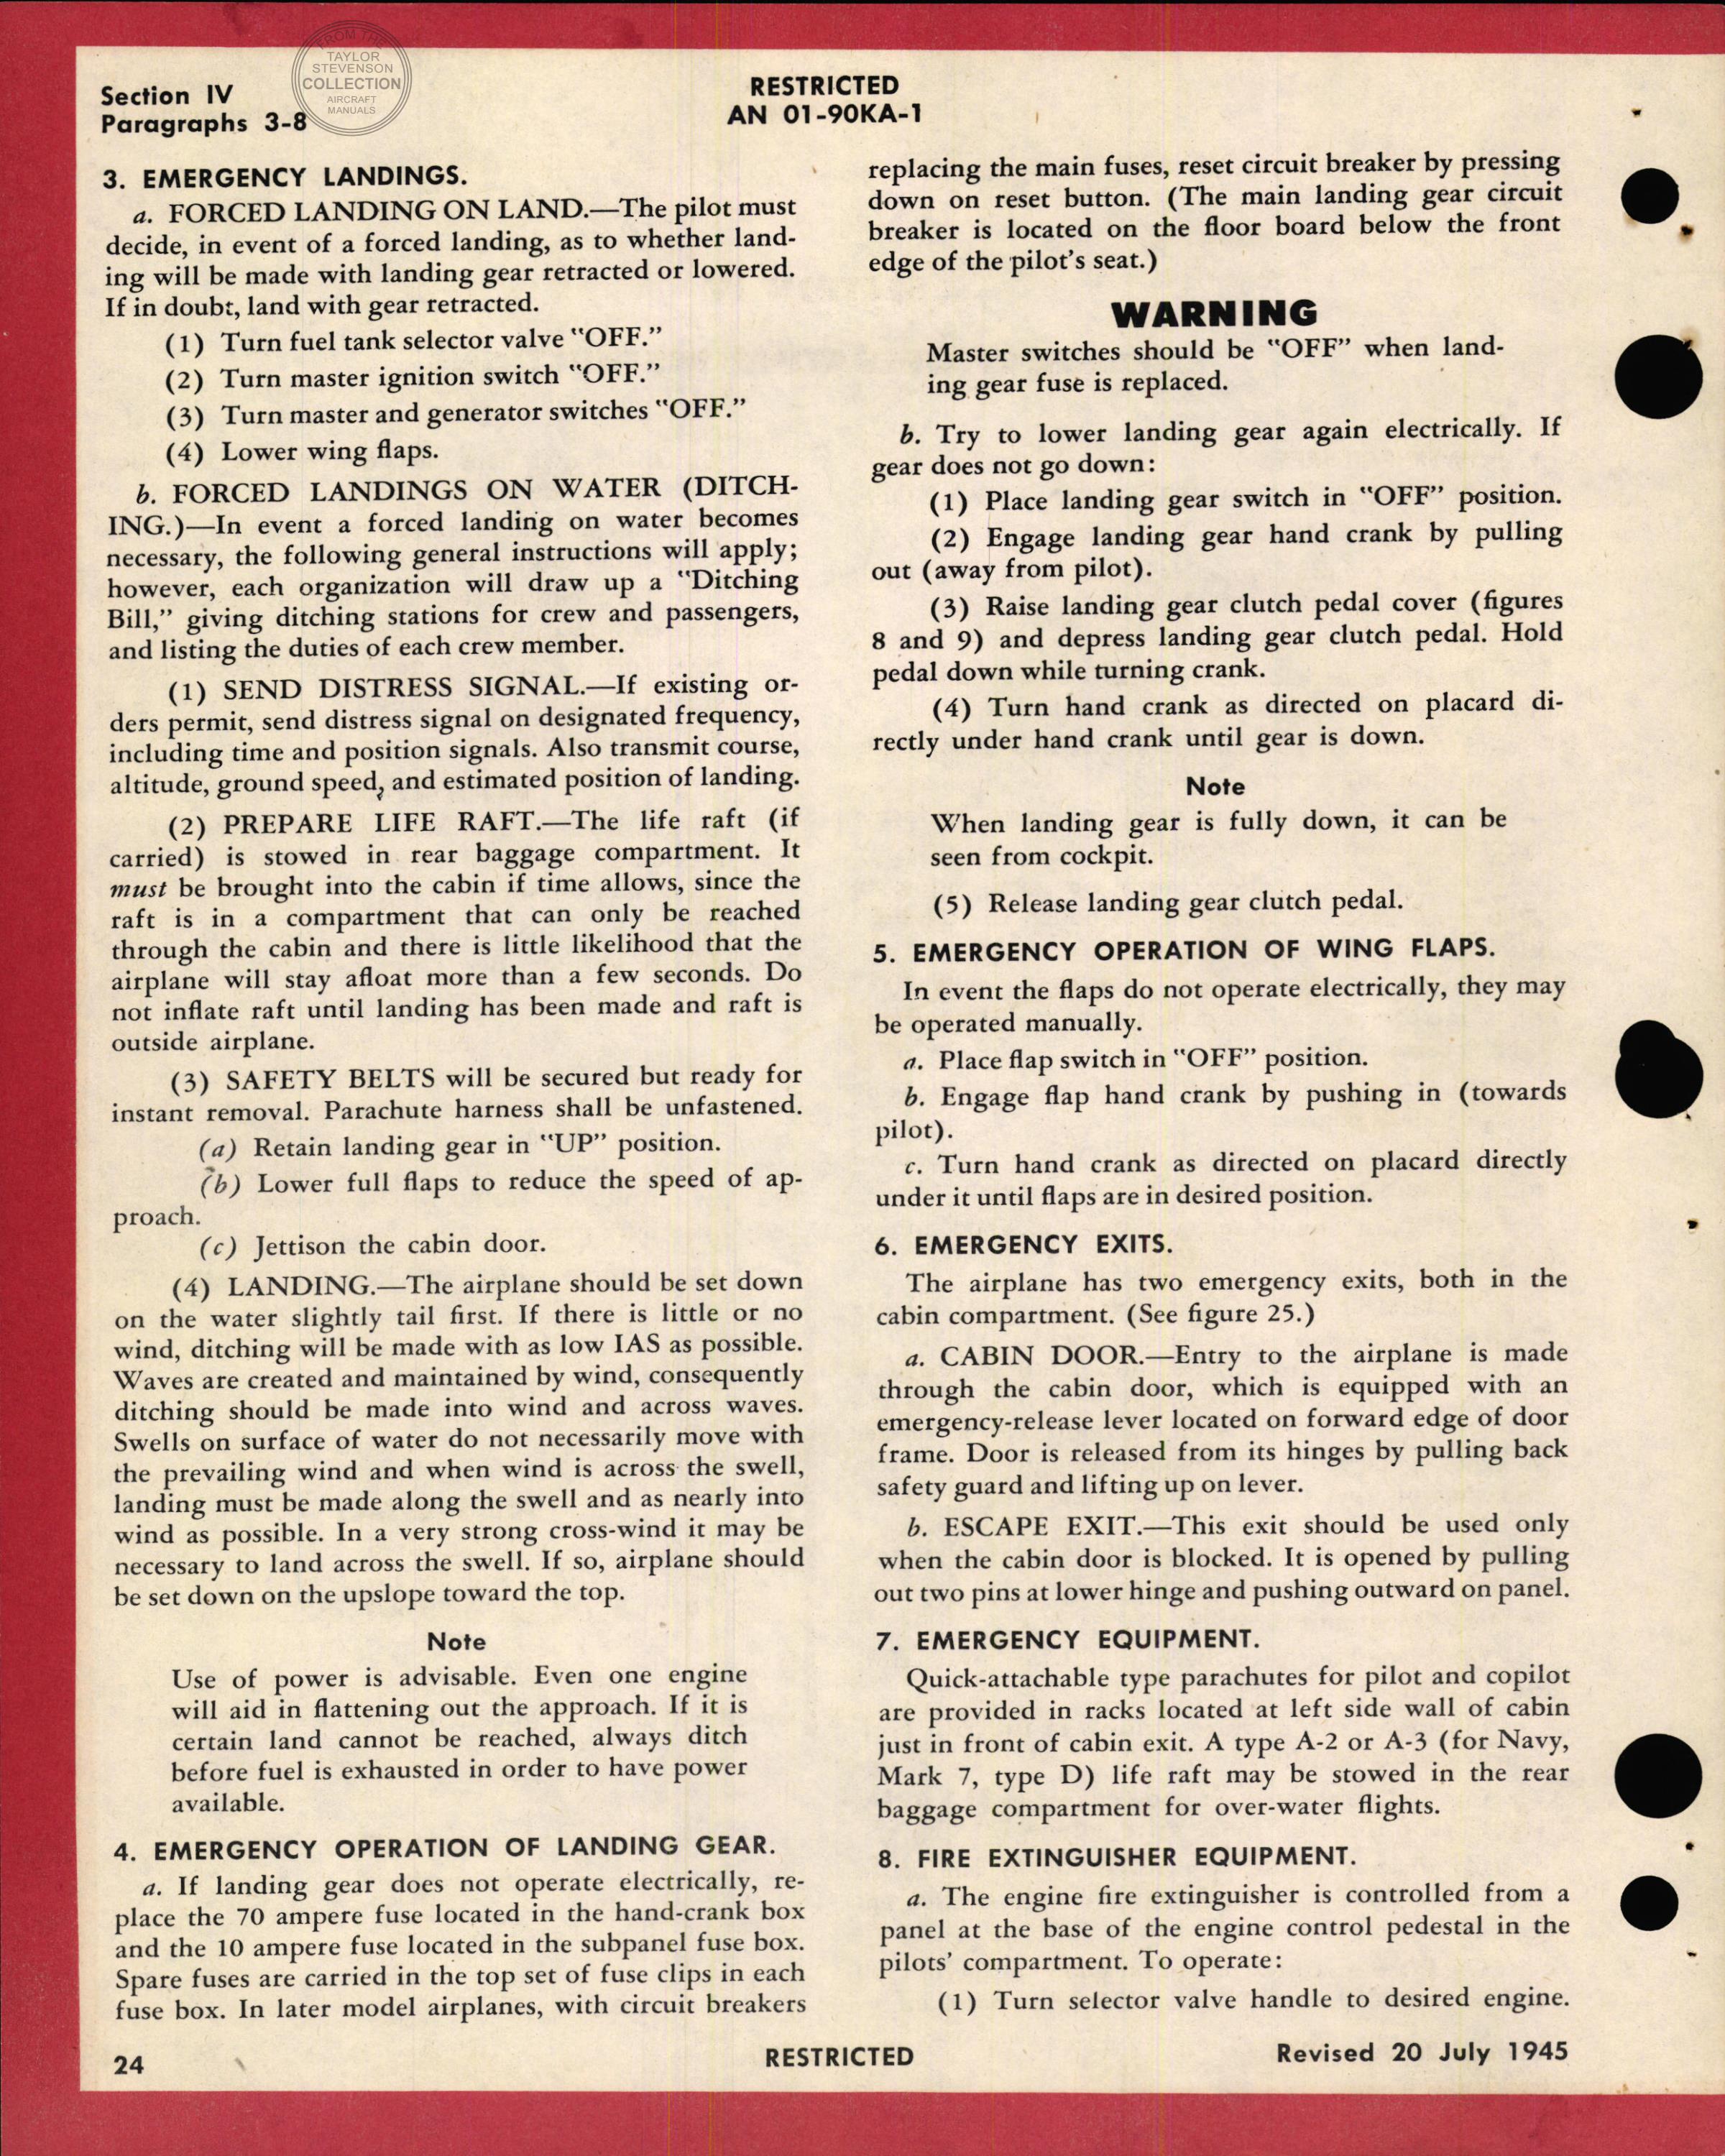 Sample page 29 from AirCorps Library document: Pilots Handbook - AT-7 - SNB-2 